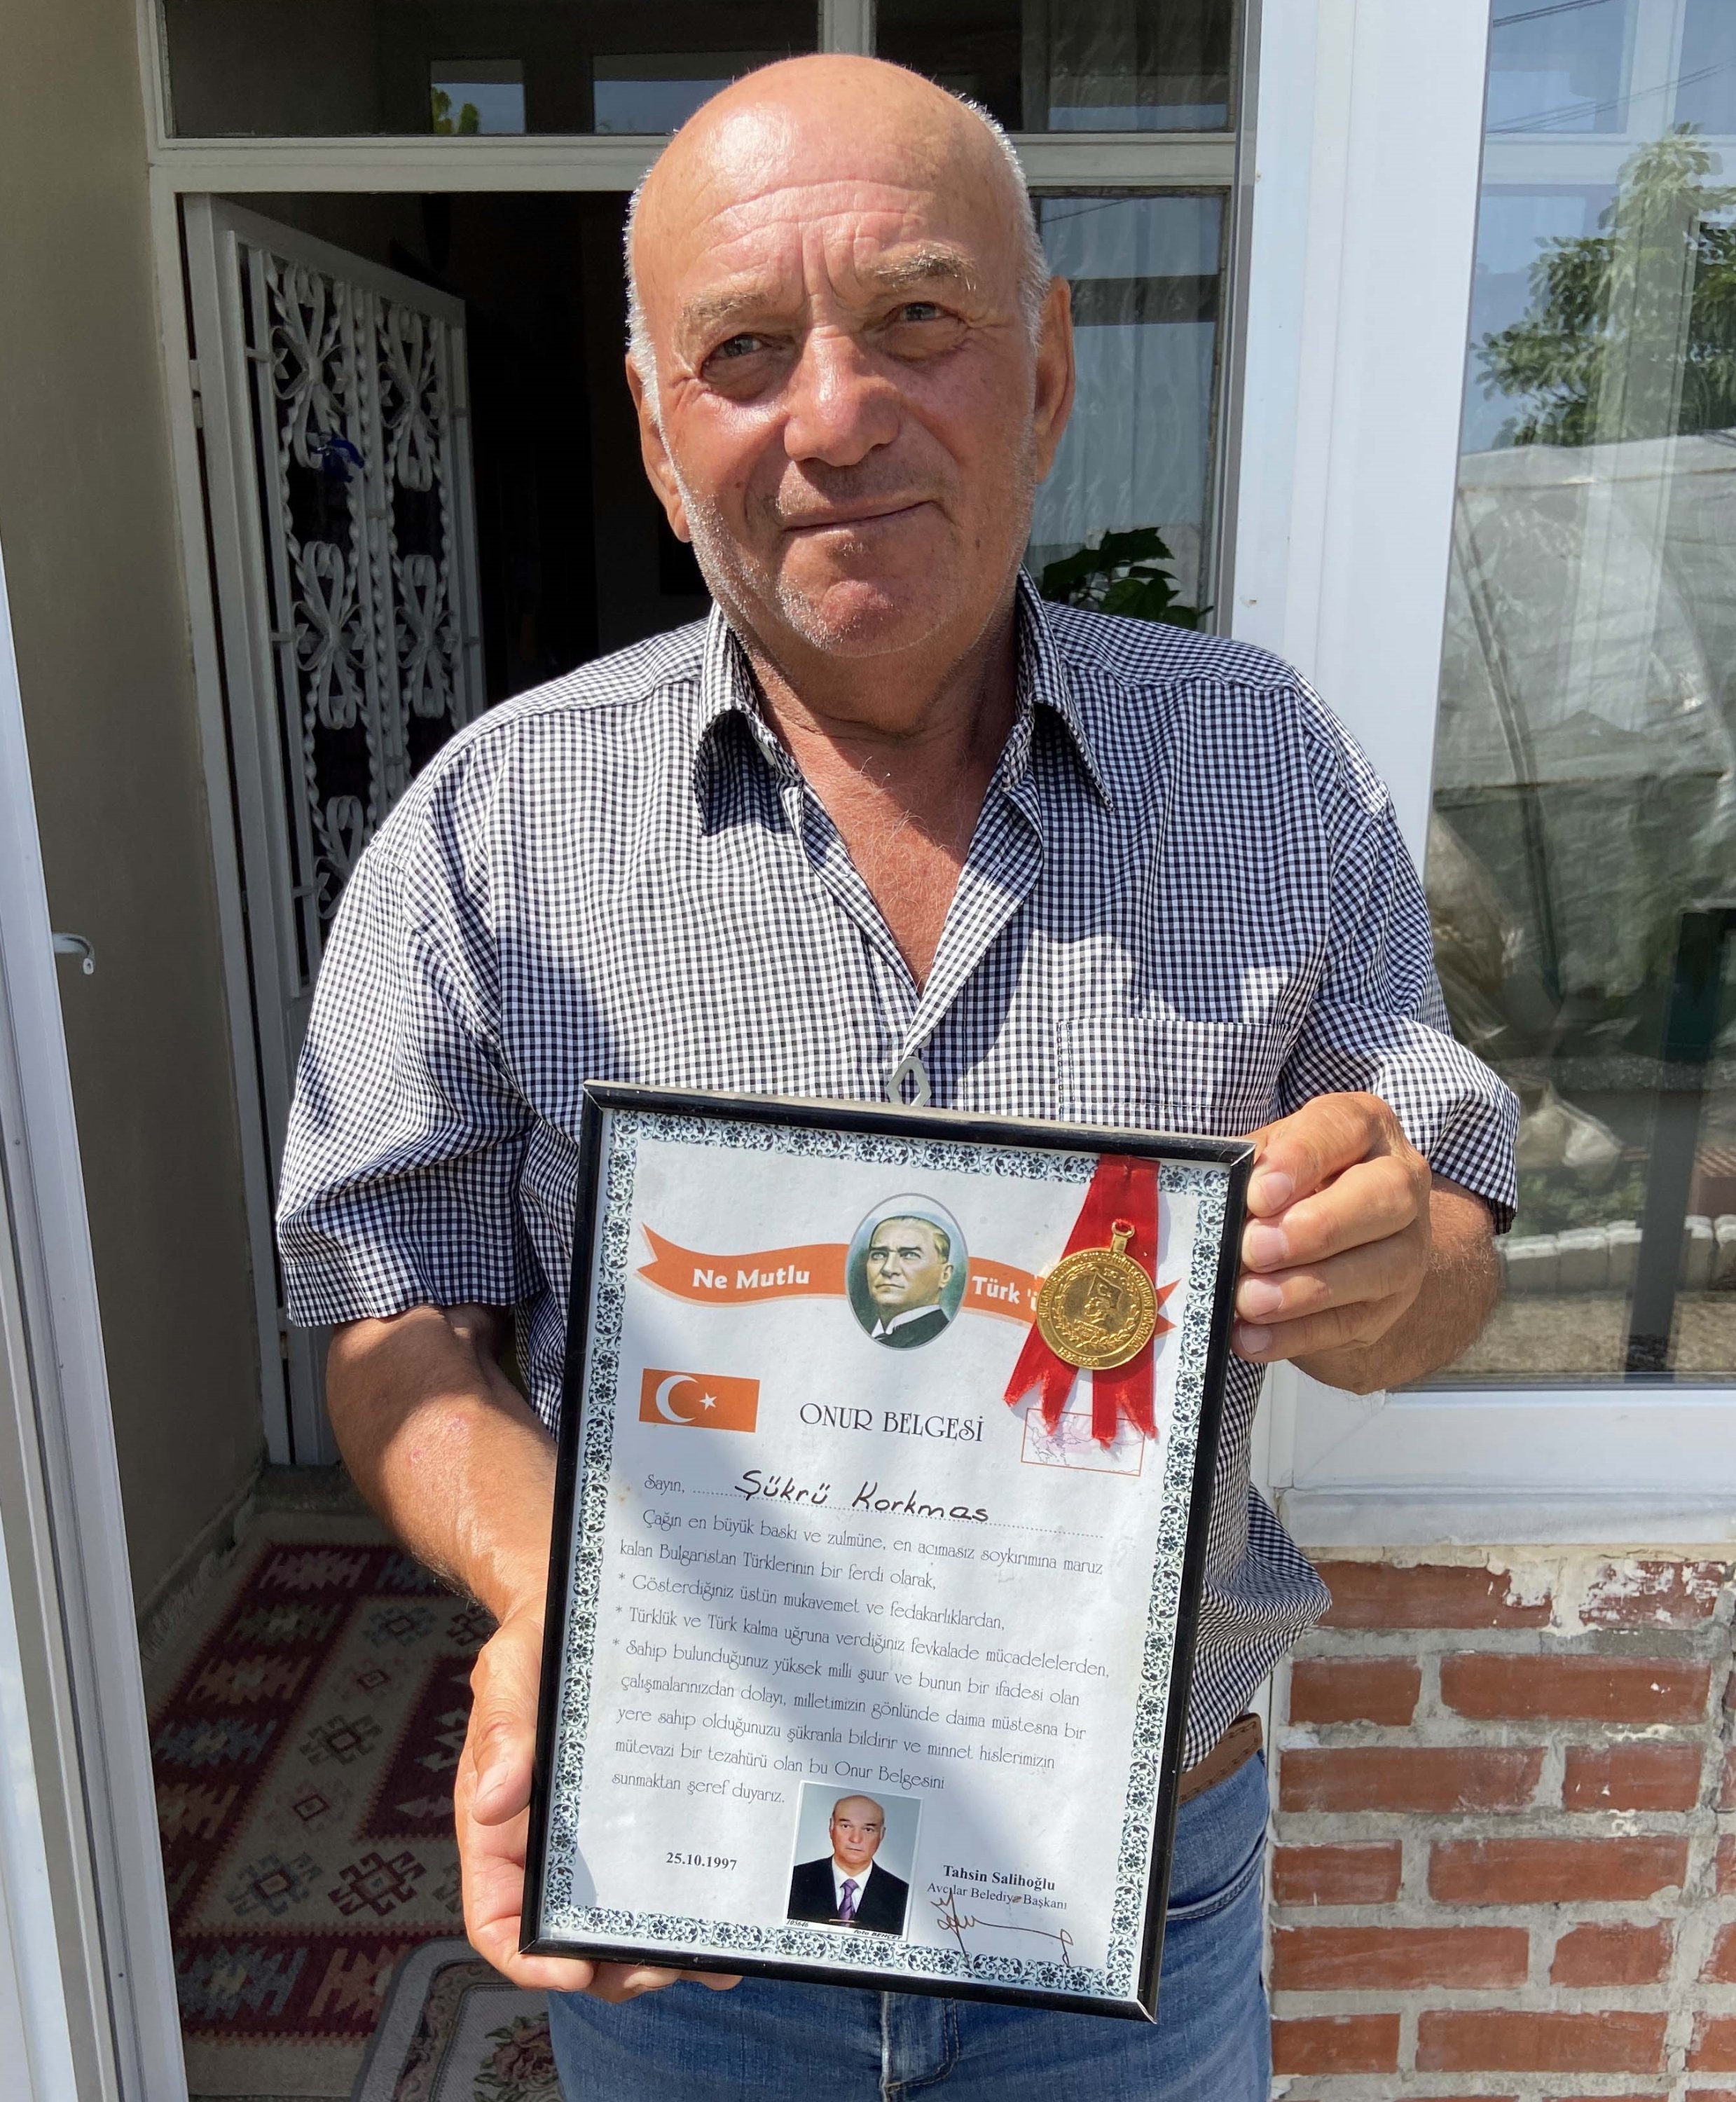 Şükrü Korkmaz holds up a 'certificate of honor' that he received when he arrived in Turkey after being forced to flee Bulgaria 32 years ago. He keeps the certificate in the best corner of his home. Edirne, Turkey, May 28, 2021. (Hakan Mehmet Şahin / Anadolu Agency)